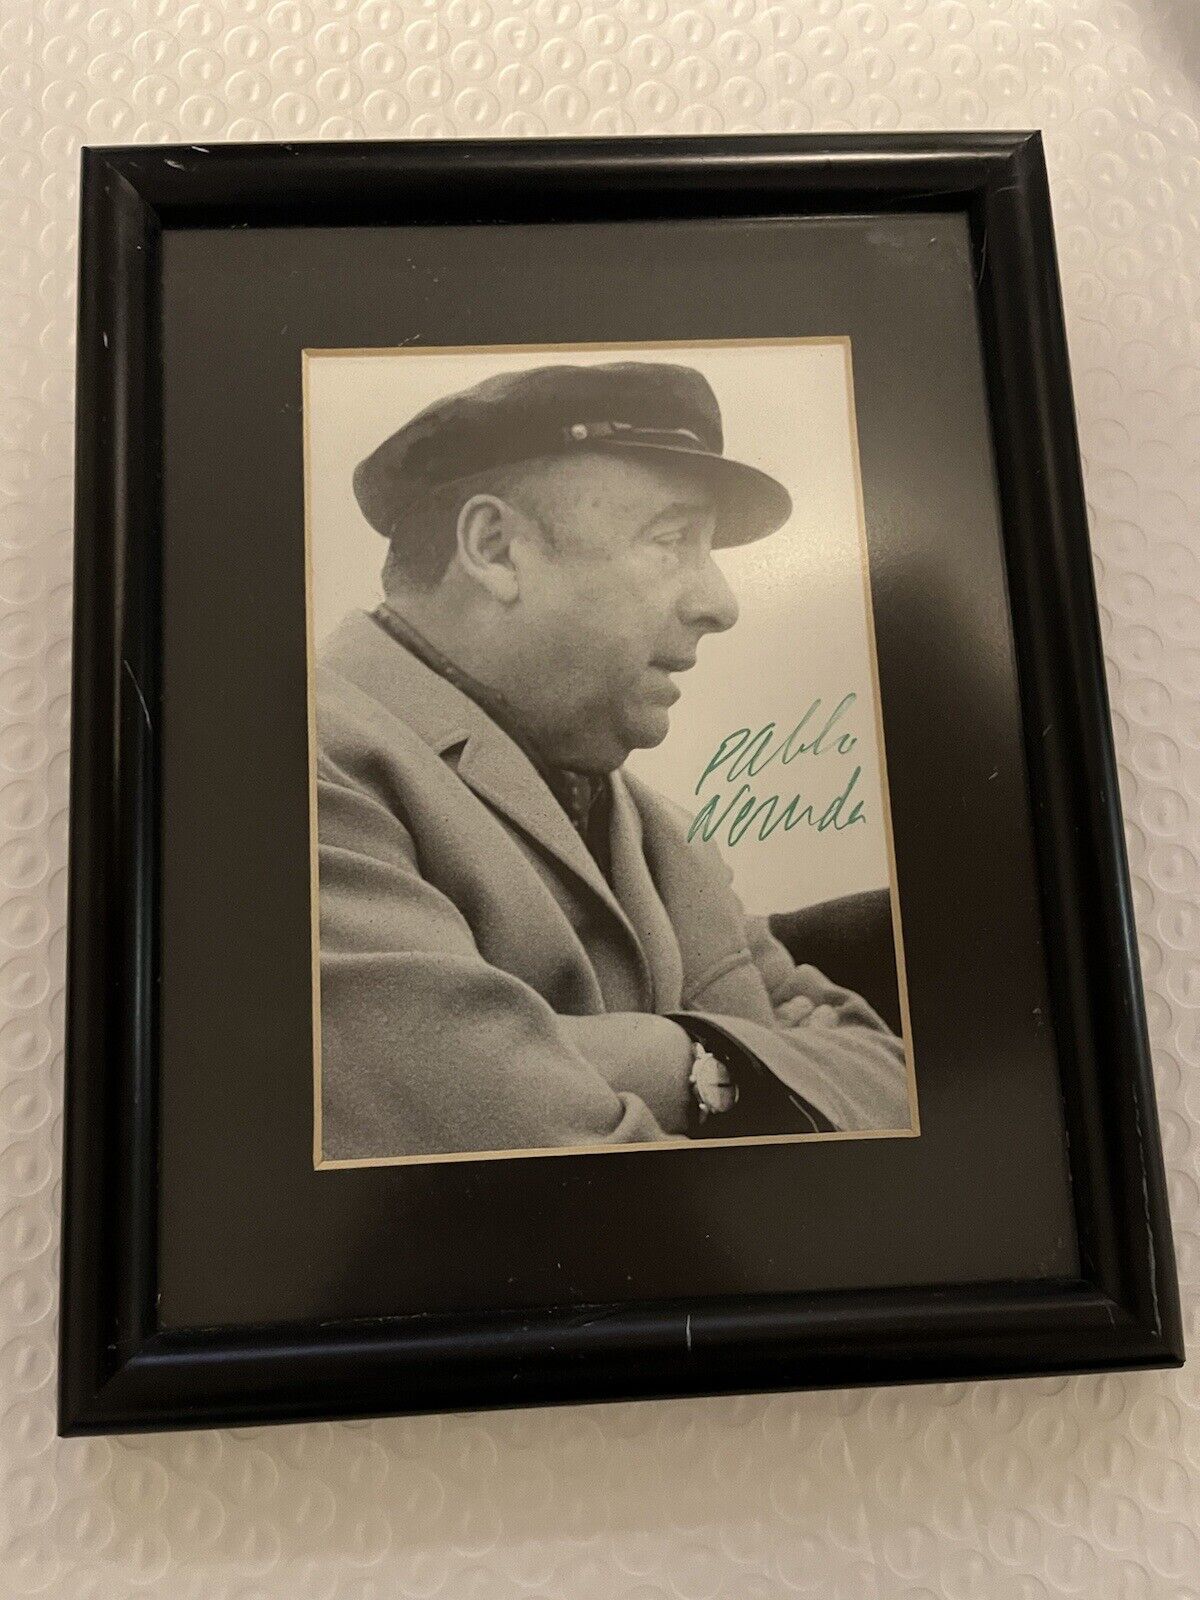 Vintage Pablo Neruda Black And White Framed Photo Picture Hand Signed Autograph